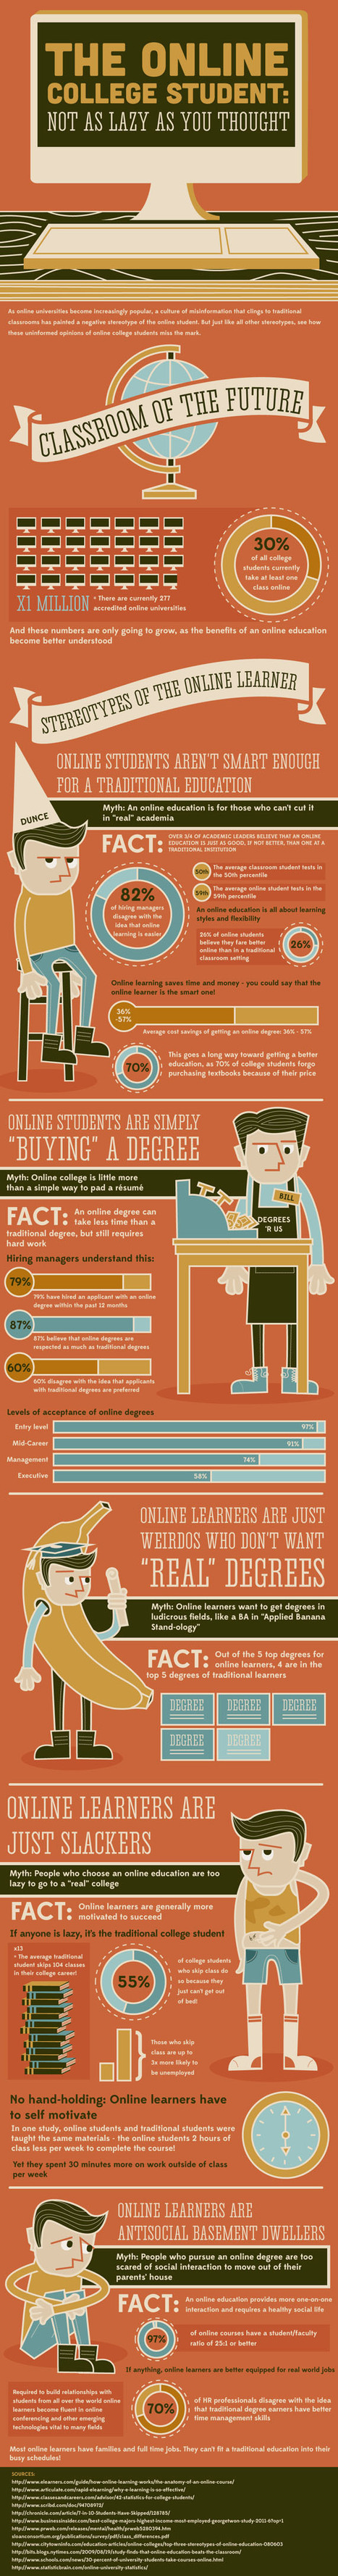 Do you have the wrong impression about online learning? [Infographic] | 21st Century Learning and Teaching | Scoop.it